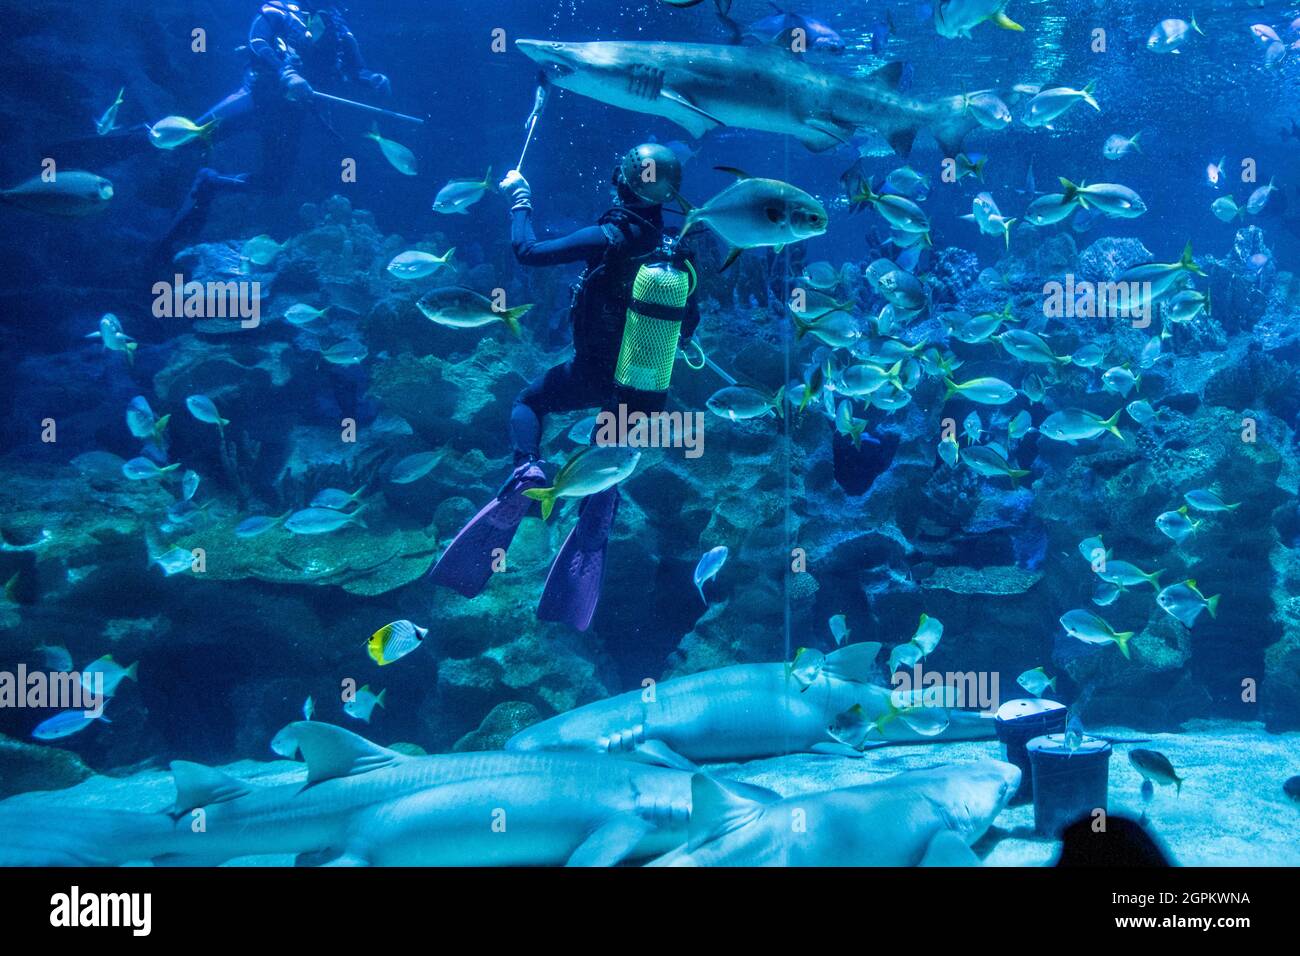 Kuala Lumpur, Malaysia. 29th Sep, 2021. A diver feeds a shark at Aquaria KLCC in Kuala Lumpur, Malaysia, Sept. 29, 2021. Aquaria KLCC will be open for fully vaccinated visitors starting from Oct. 1. Credit: Chong Voon Chung/Xinhua/Alamy Live News Stock Photo